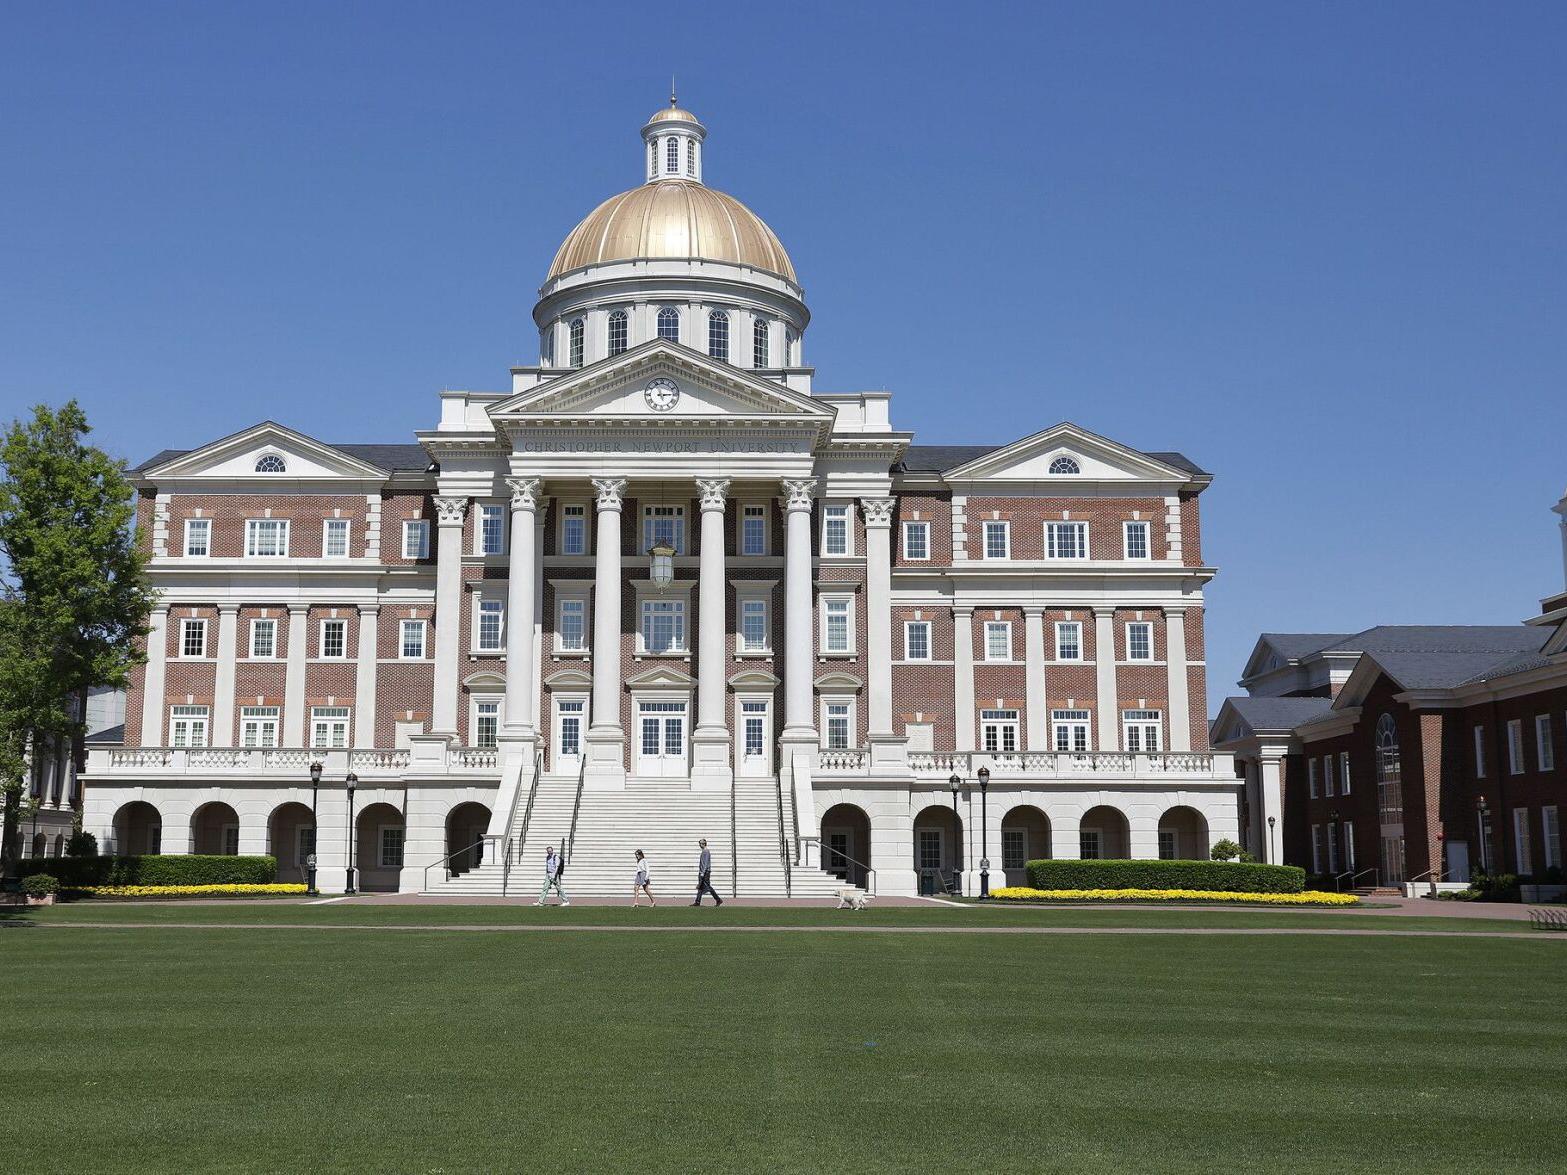 Cnu Spring 2022 Calendar After Protest Over Twitter Posts, Christopher Newport University Professor  Says She Won't Attend Forum To Meet With Students | State And Regional News  | Roanoke.com